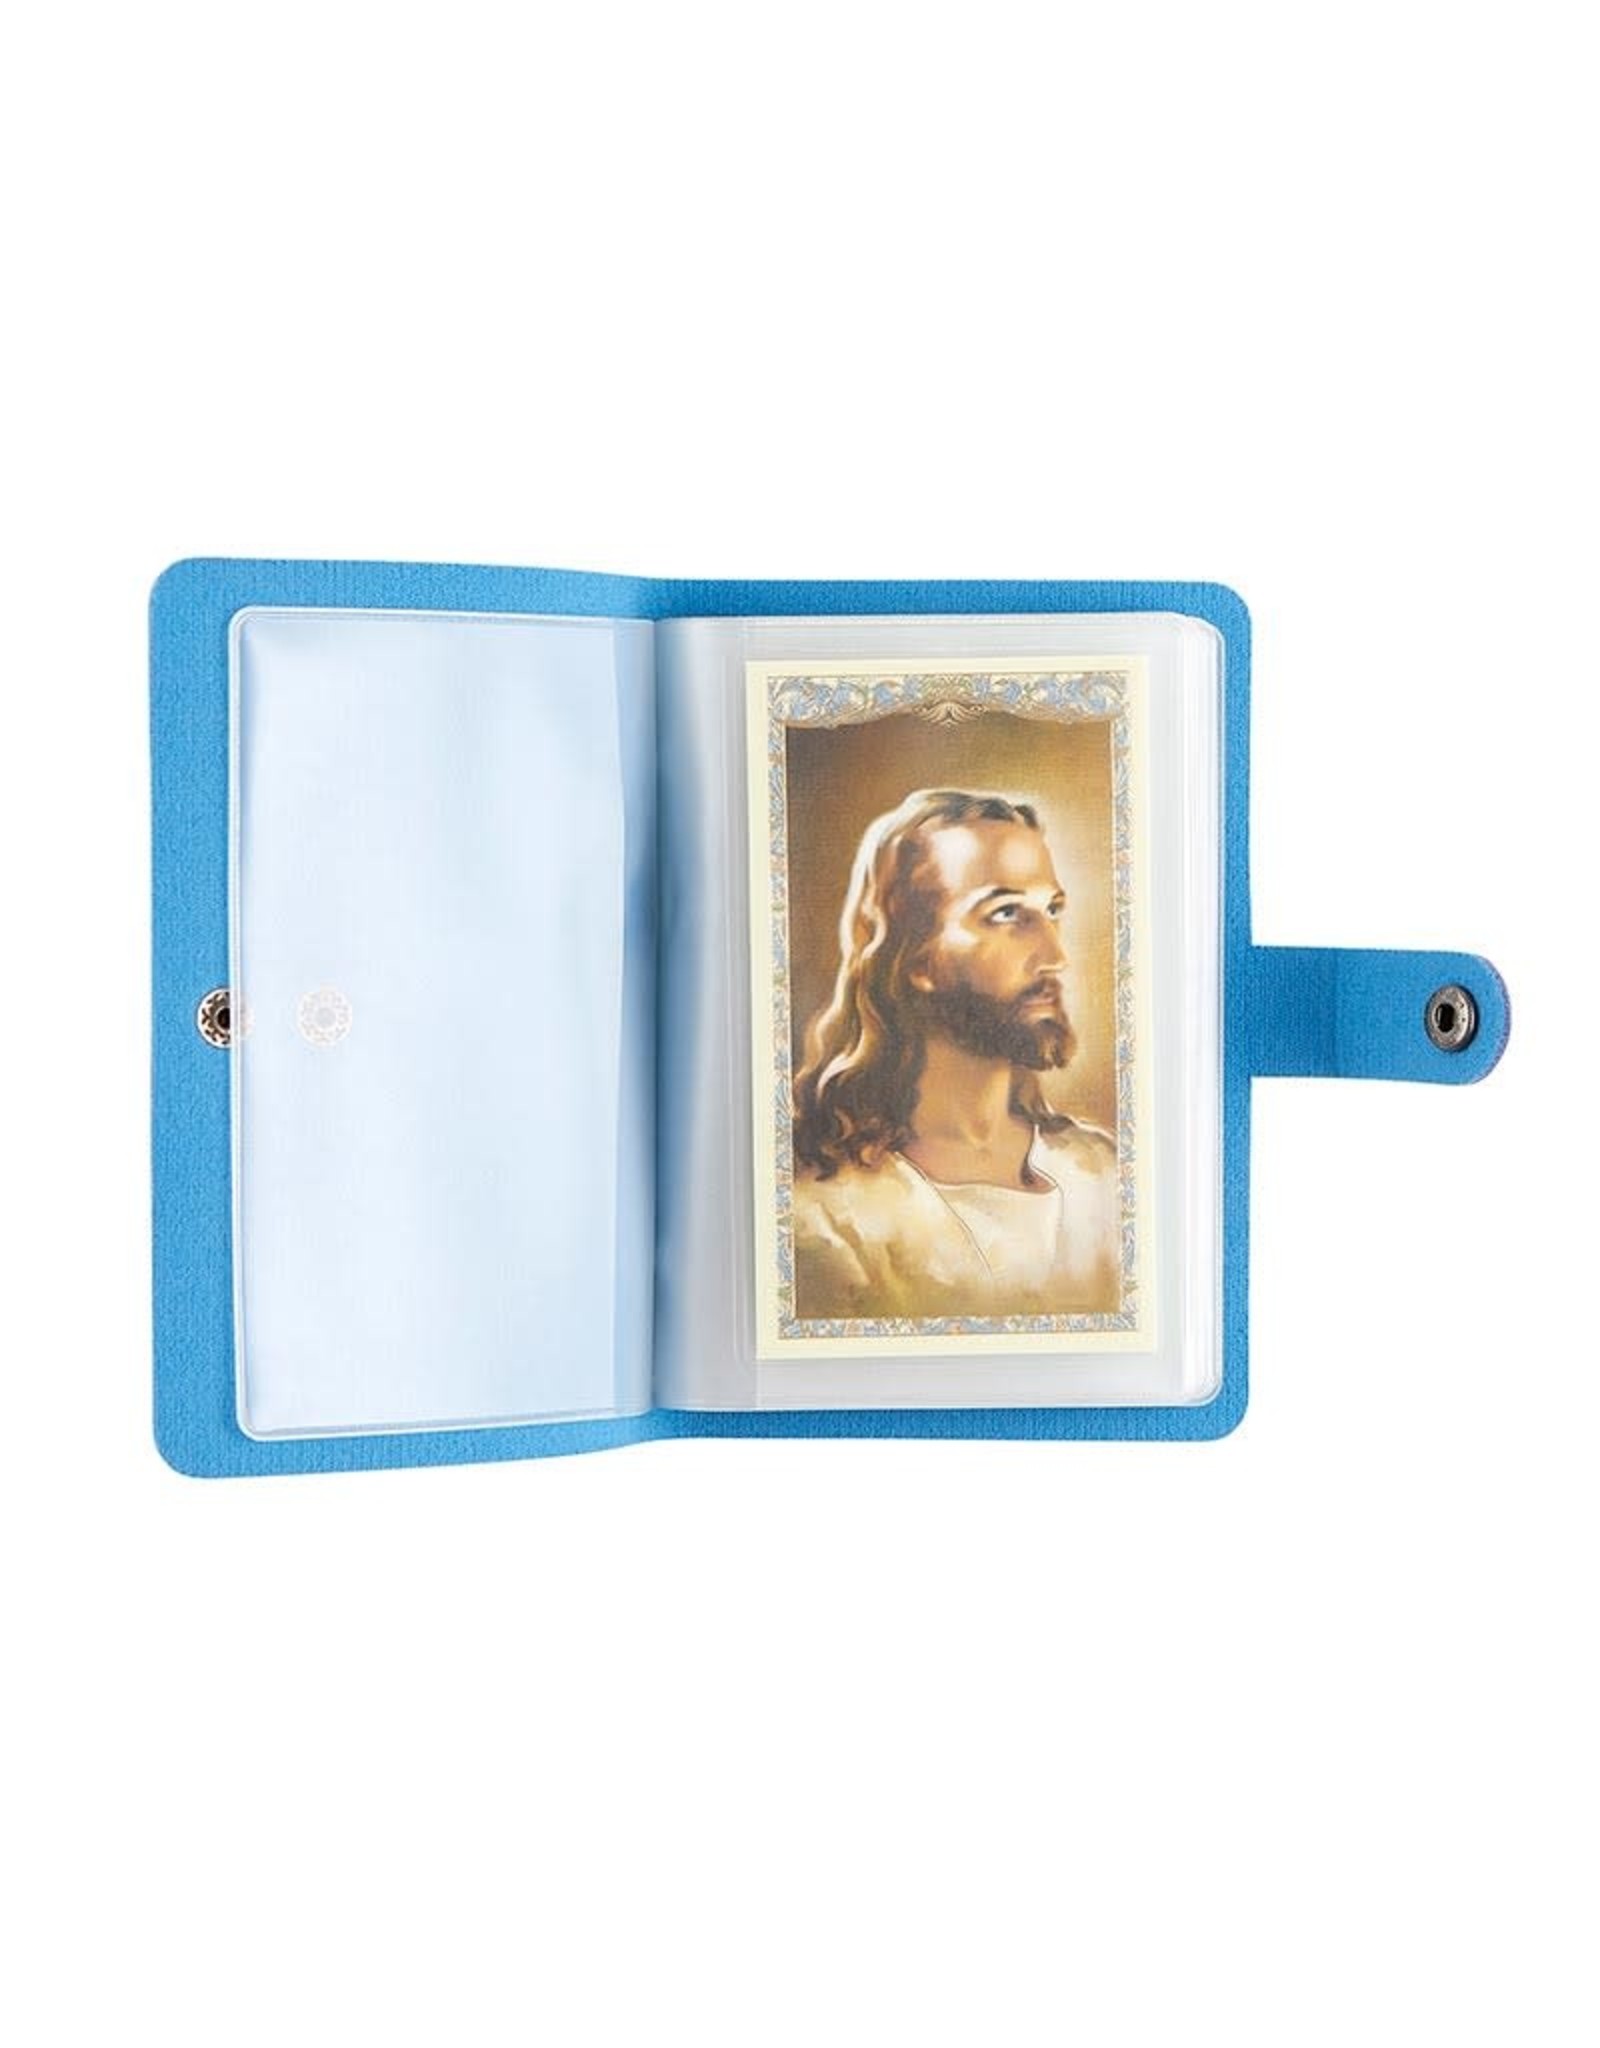 CBC - A Holy Cards Booklet - Blue